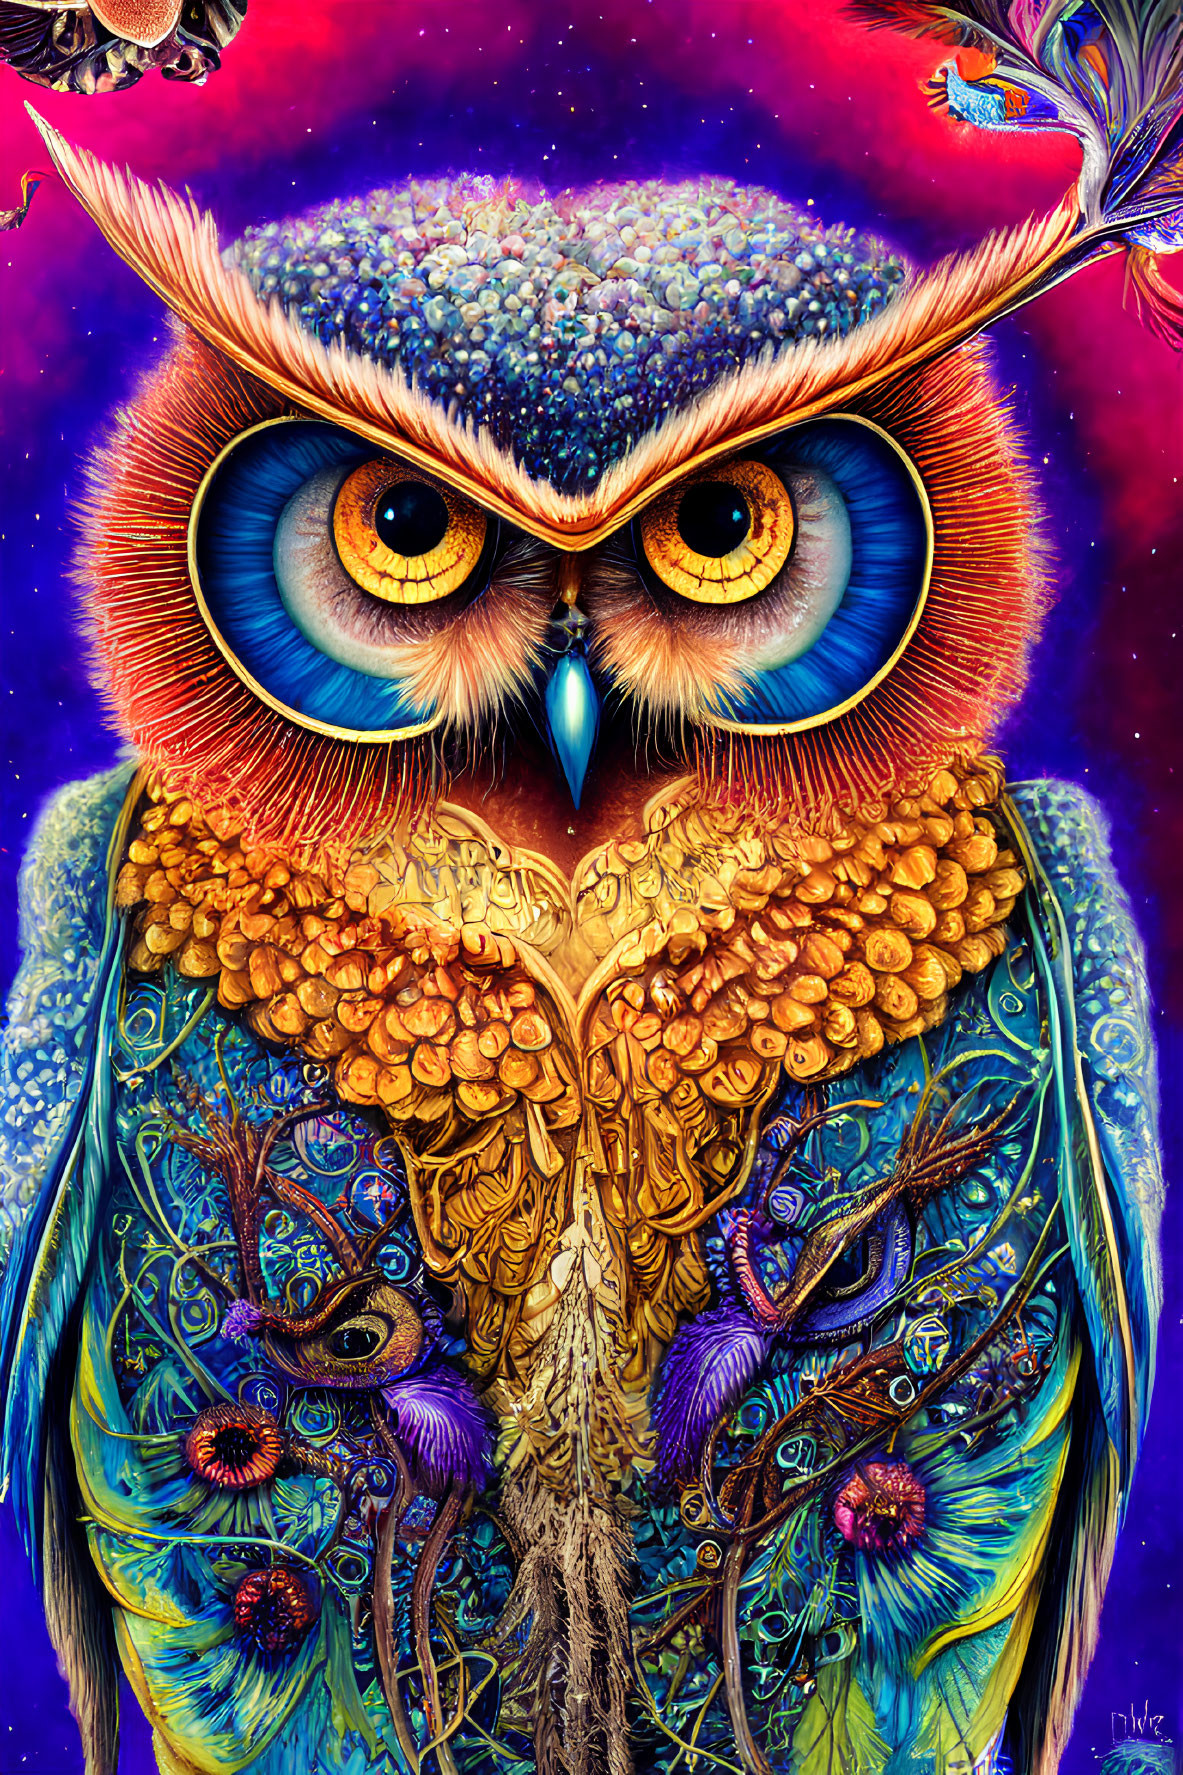 Colorful Psychedelic Owl Illustration with Detailed Patterns and Intense Blue Eyes